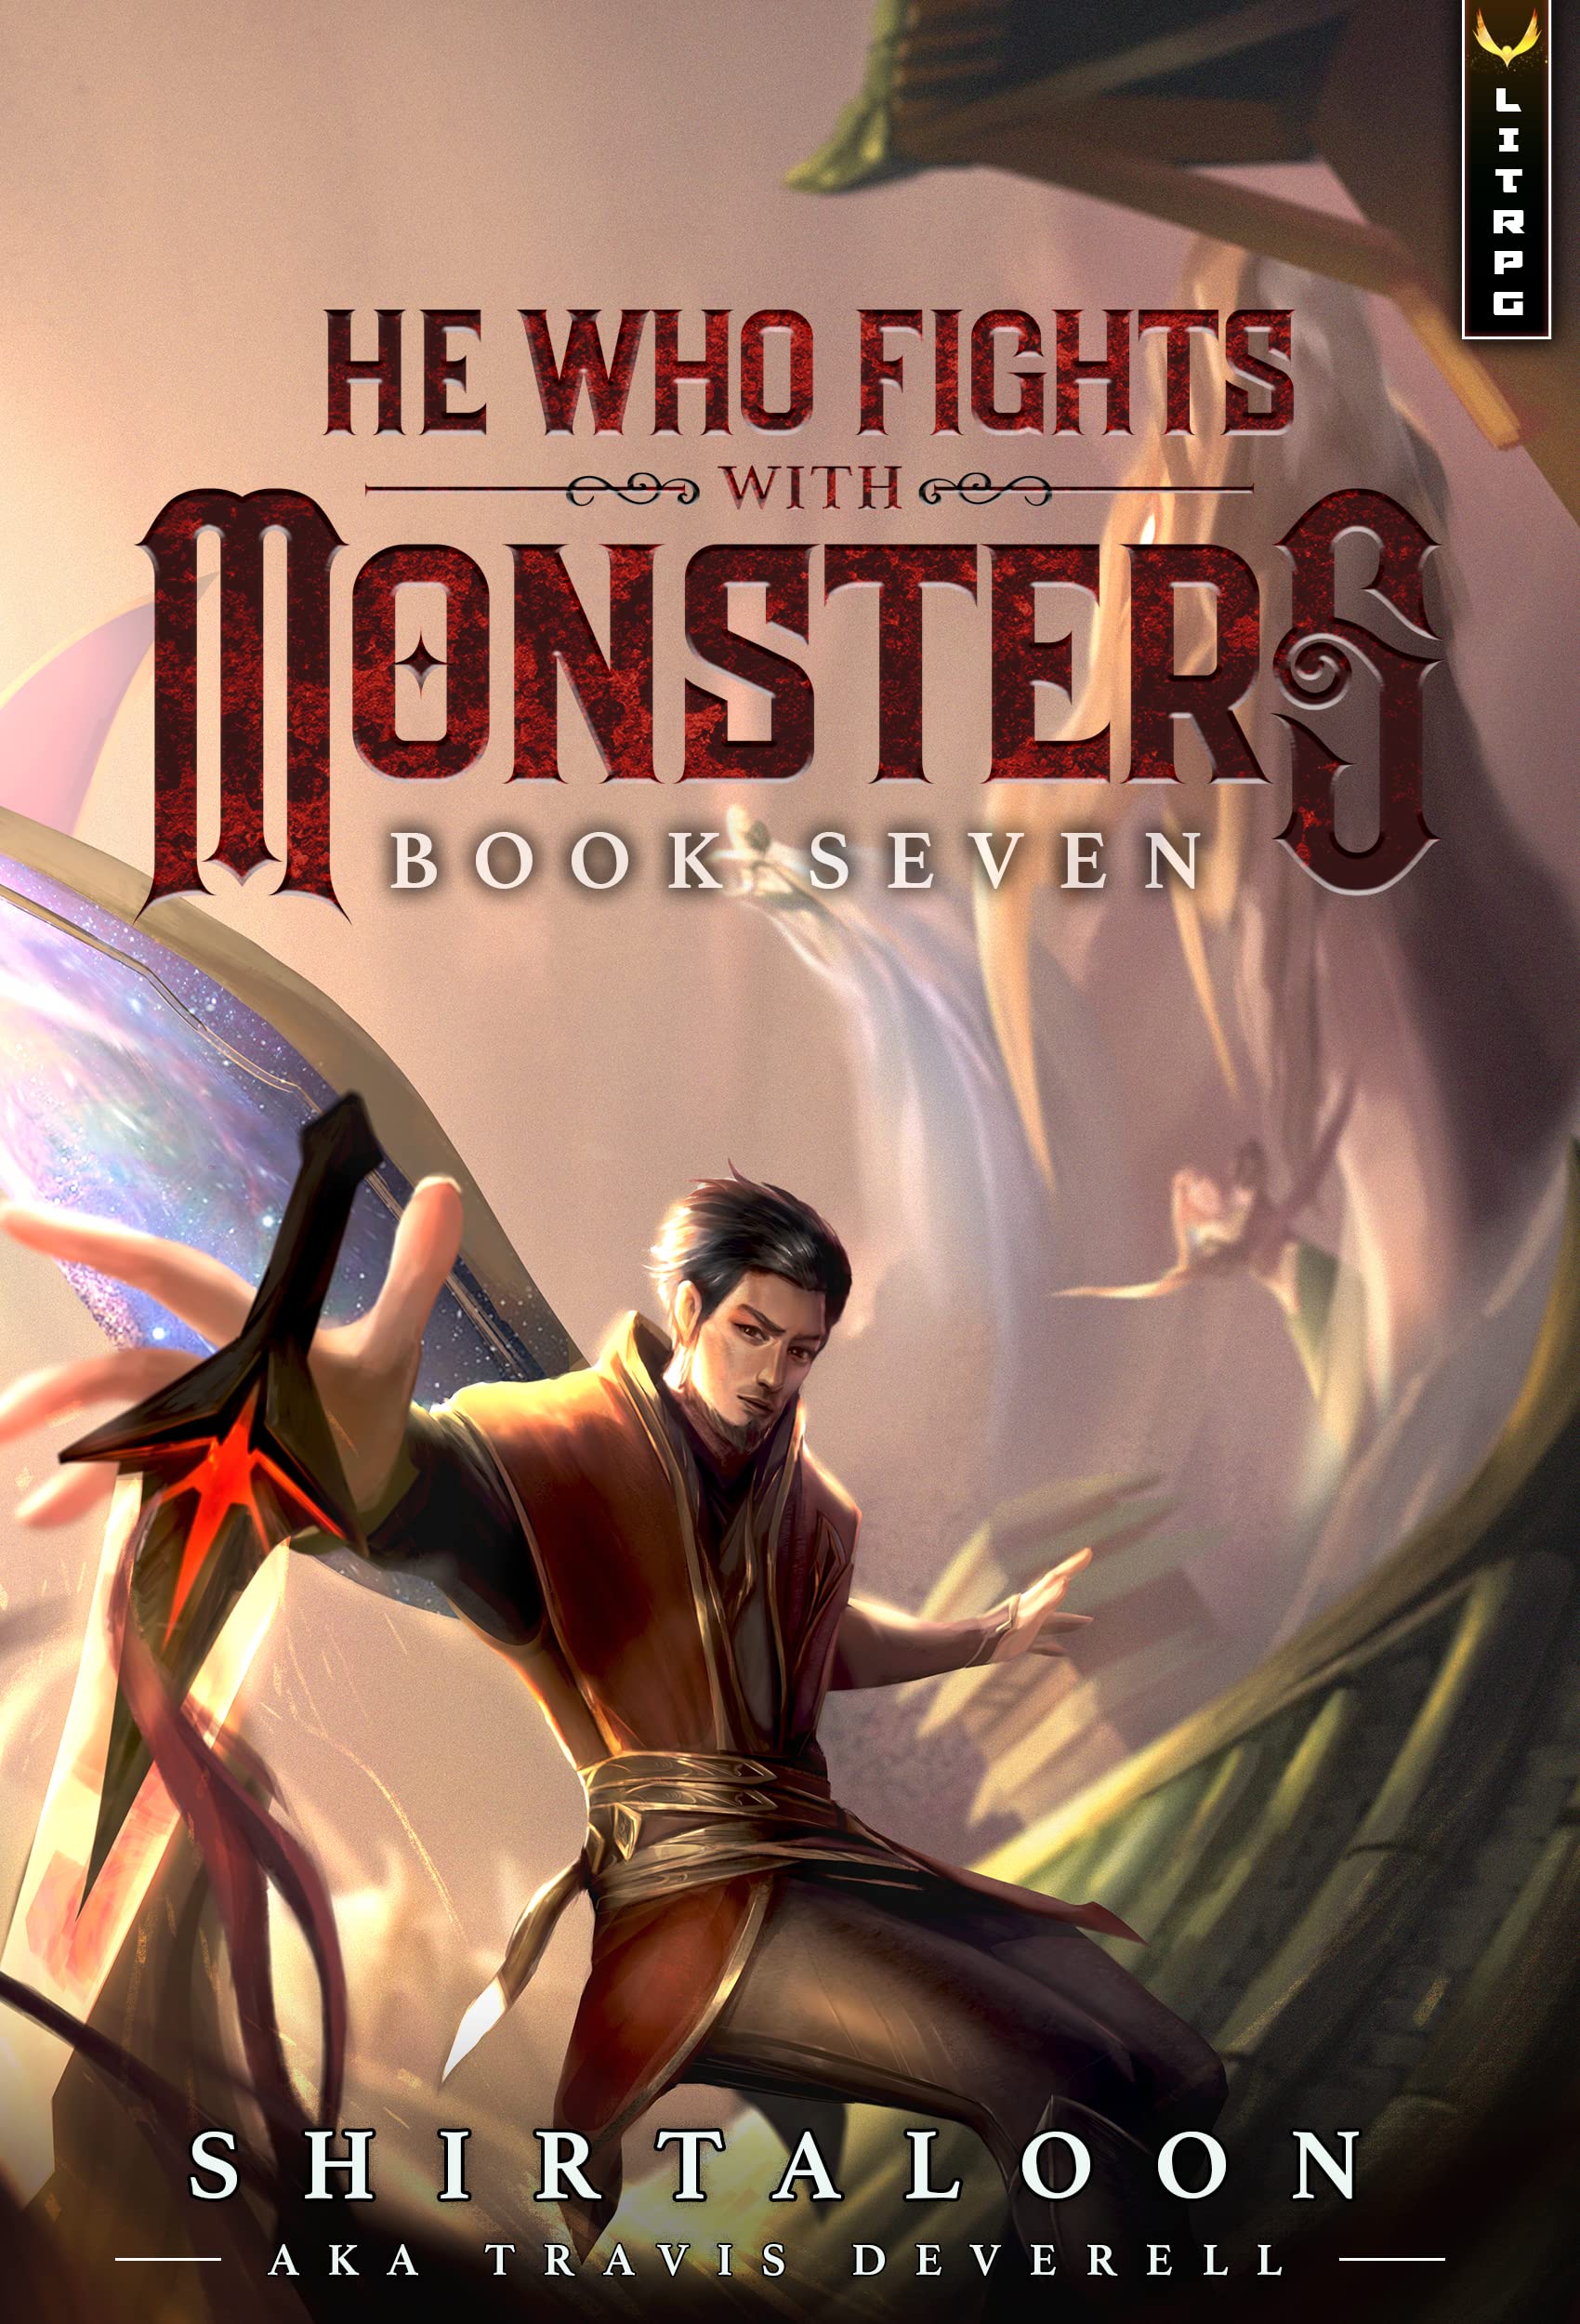 Shirtaloon, Travis Deverell: He Who Fights With Monsters 7